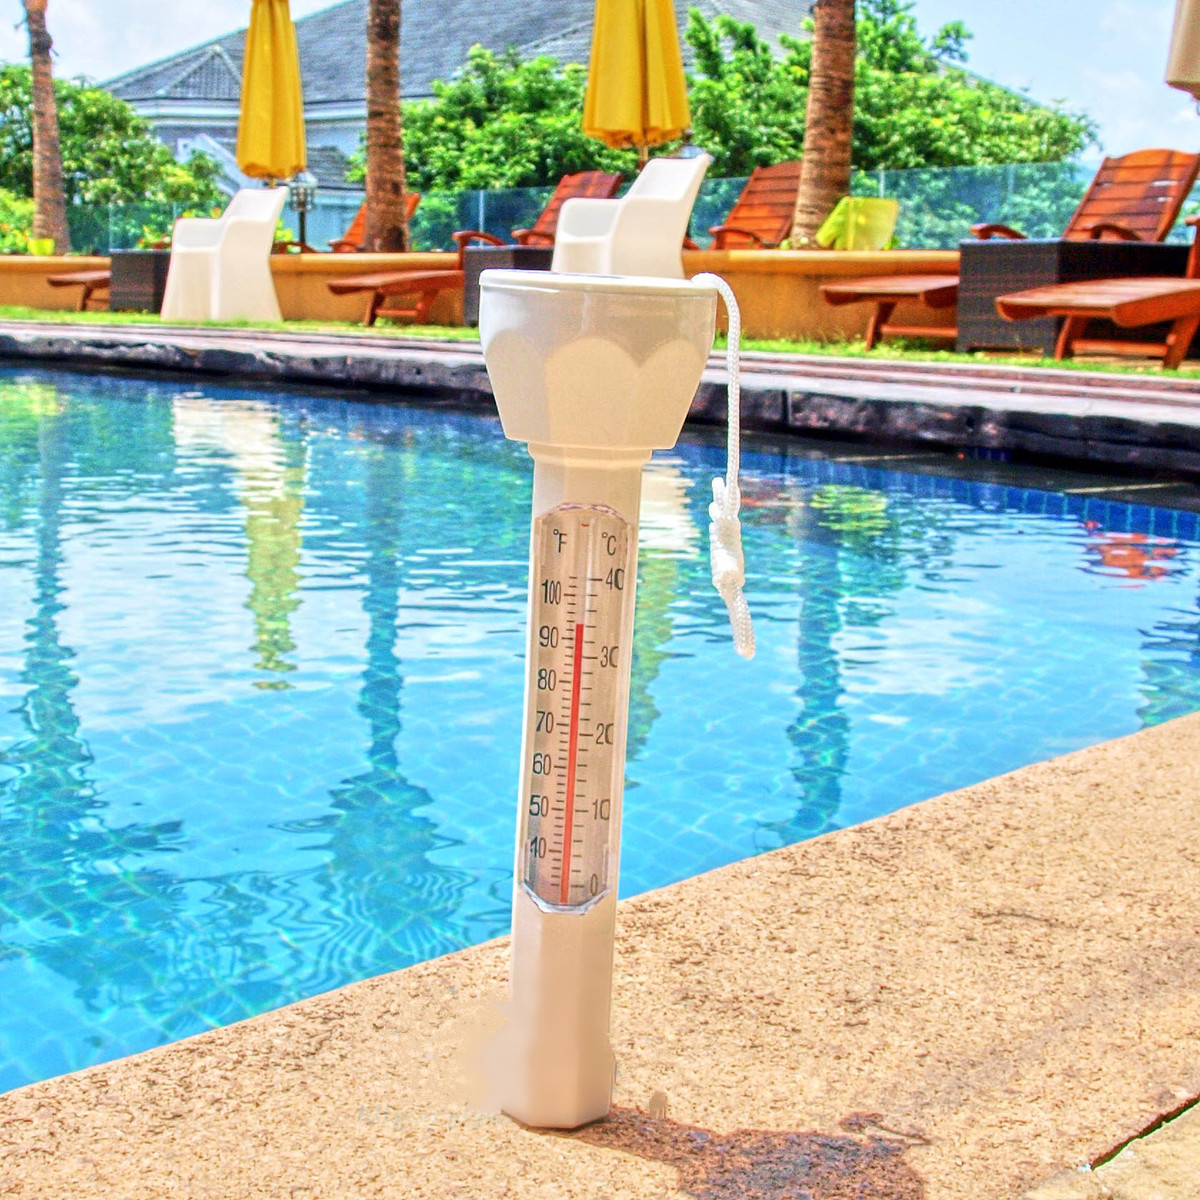 White-Floating-Water-Swimming-Pool-Bath-Spa-Hot-Tub-Temperature-Thermometer--1151459-4